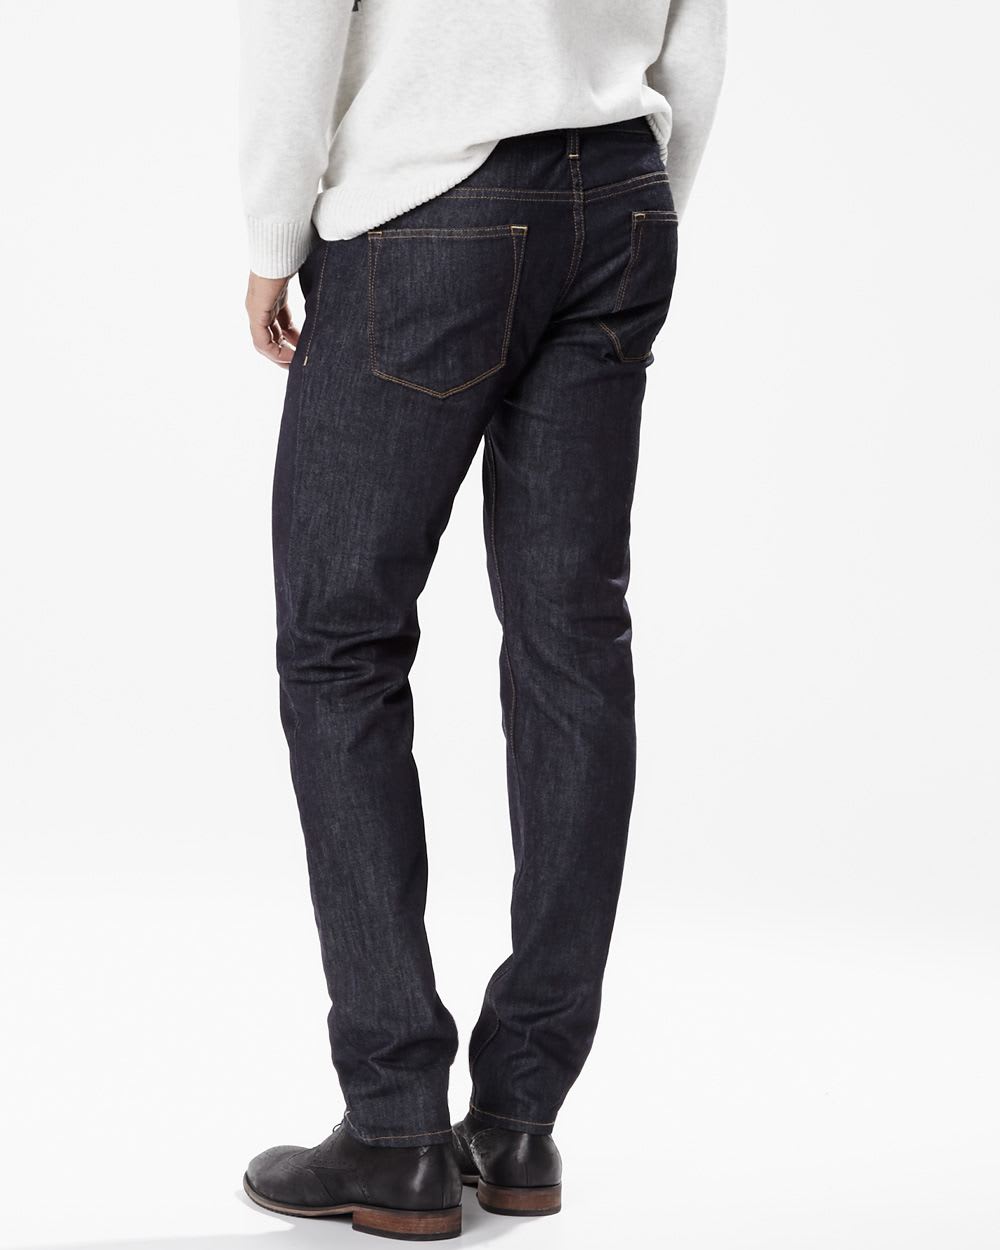 Slim fit Nathan jean - 32 inch | RW&CO.